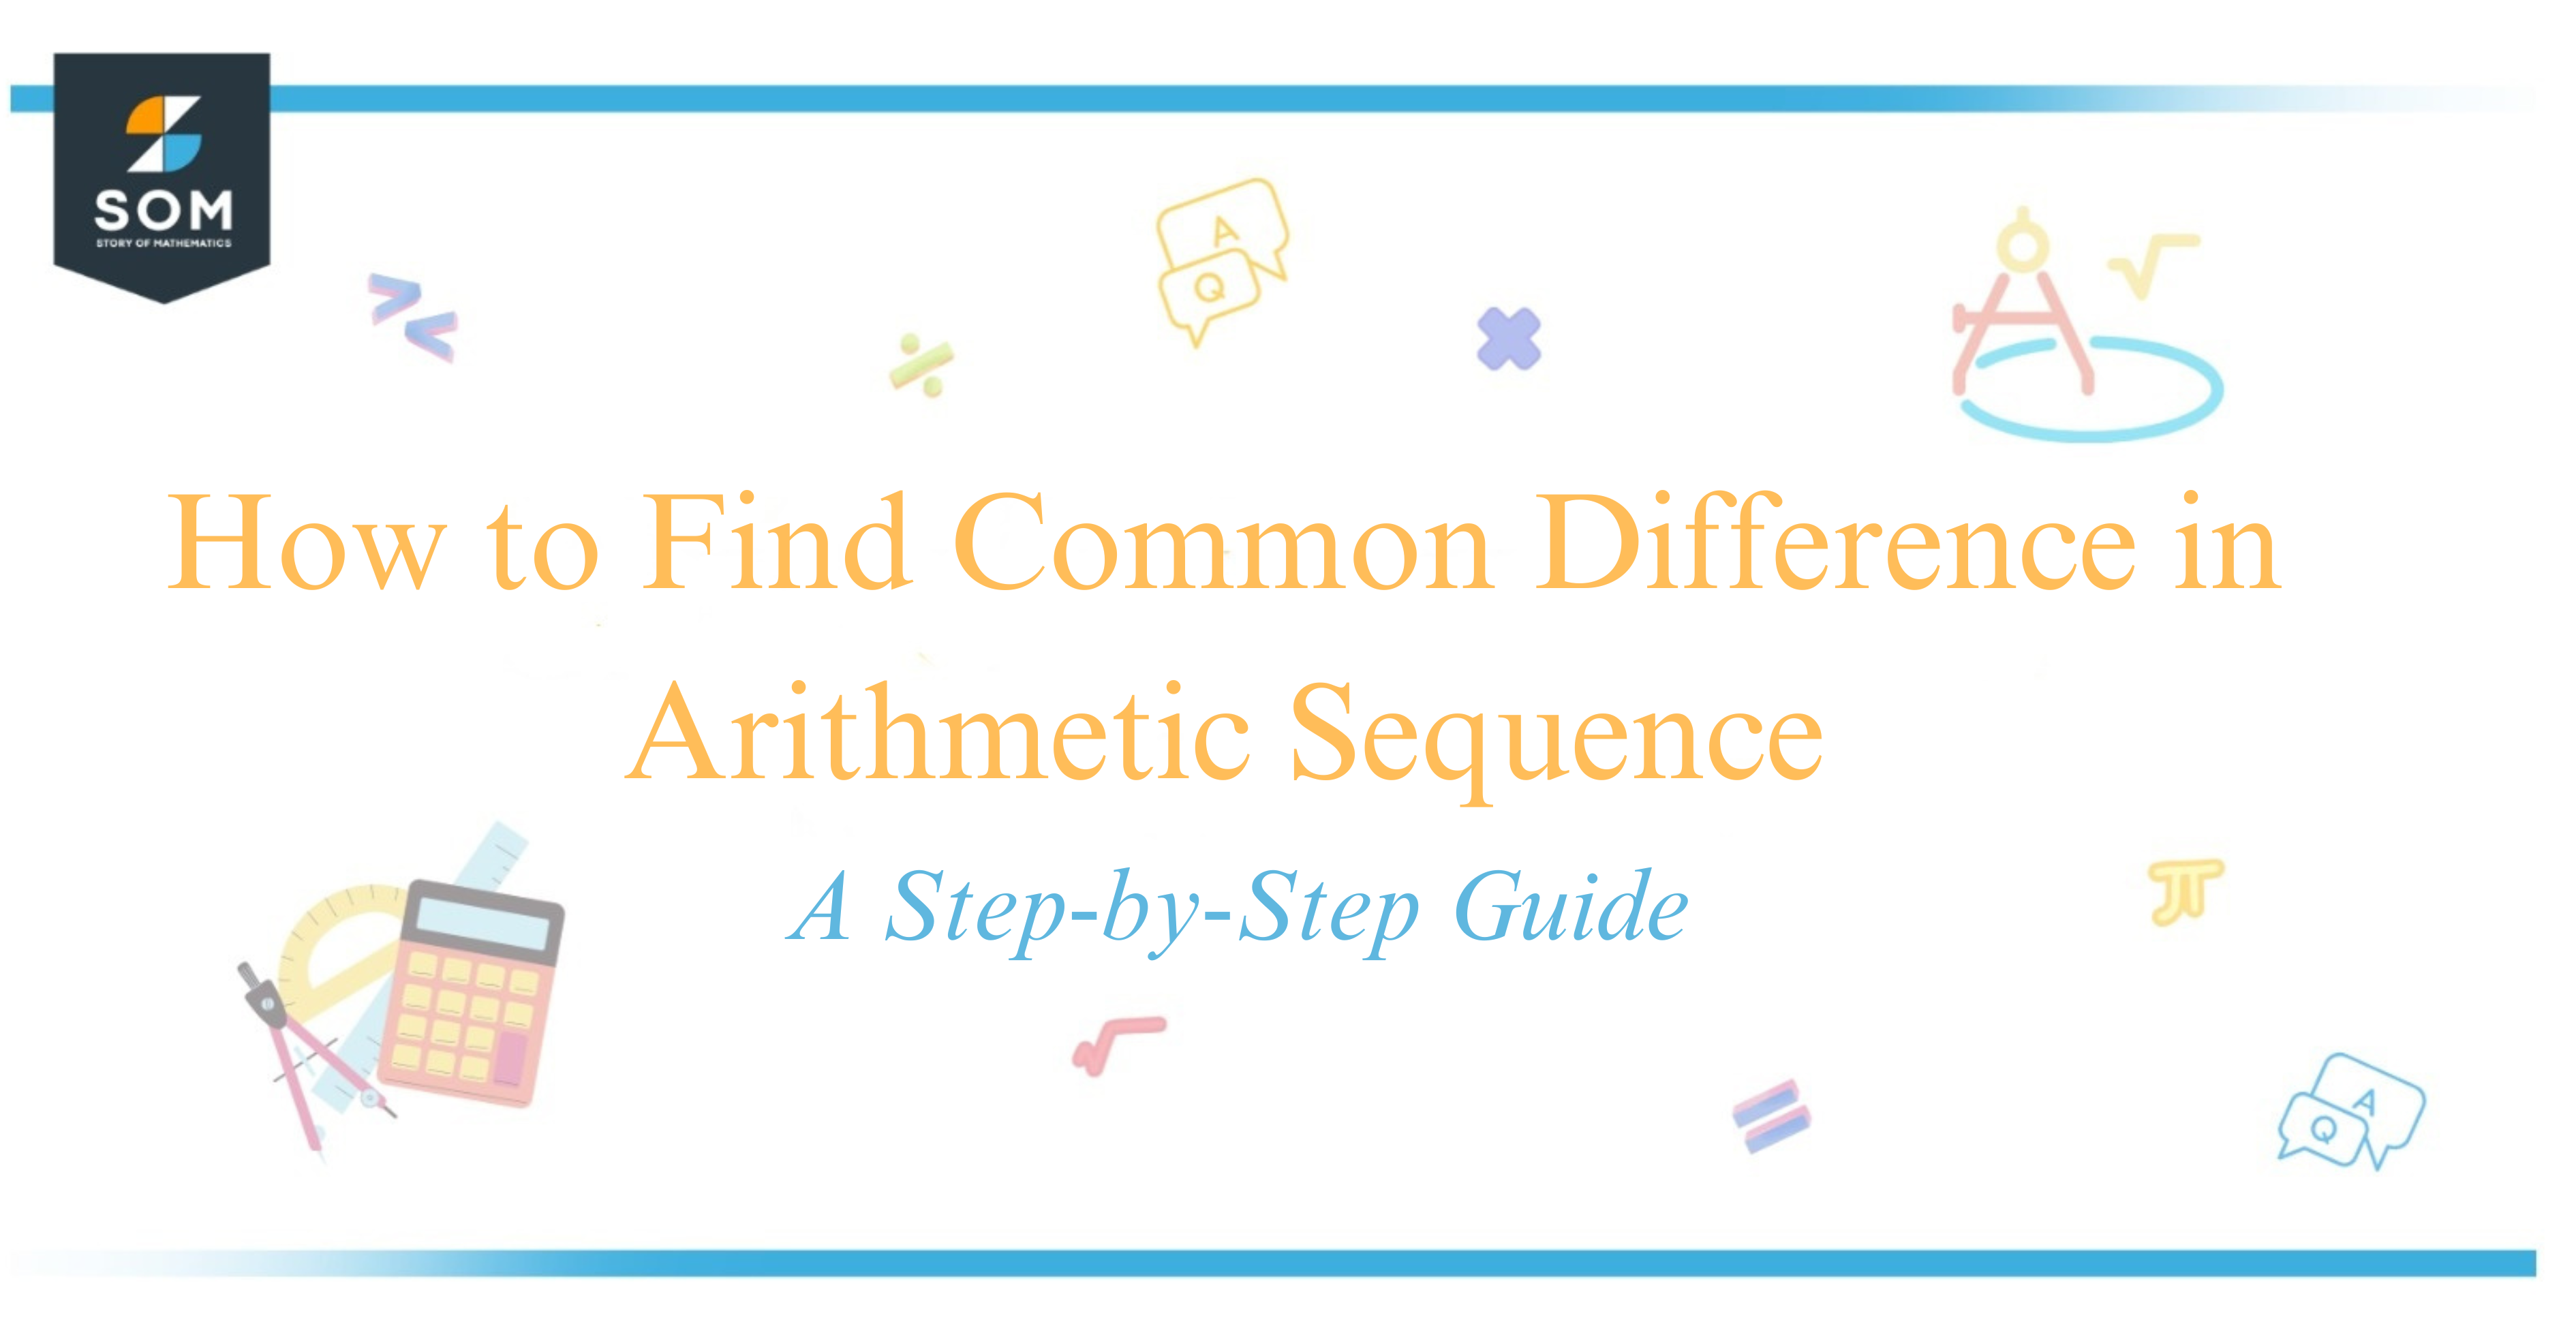 How to Find Common Difference in Arithmetic Sequence A Step-by-Step Guide